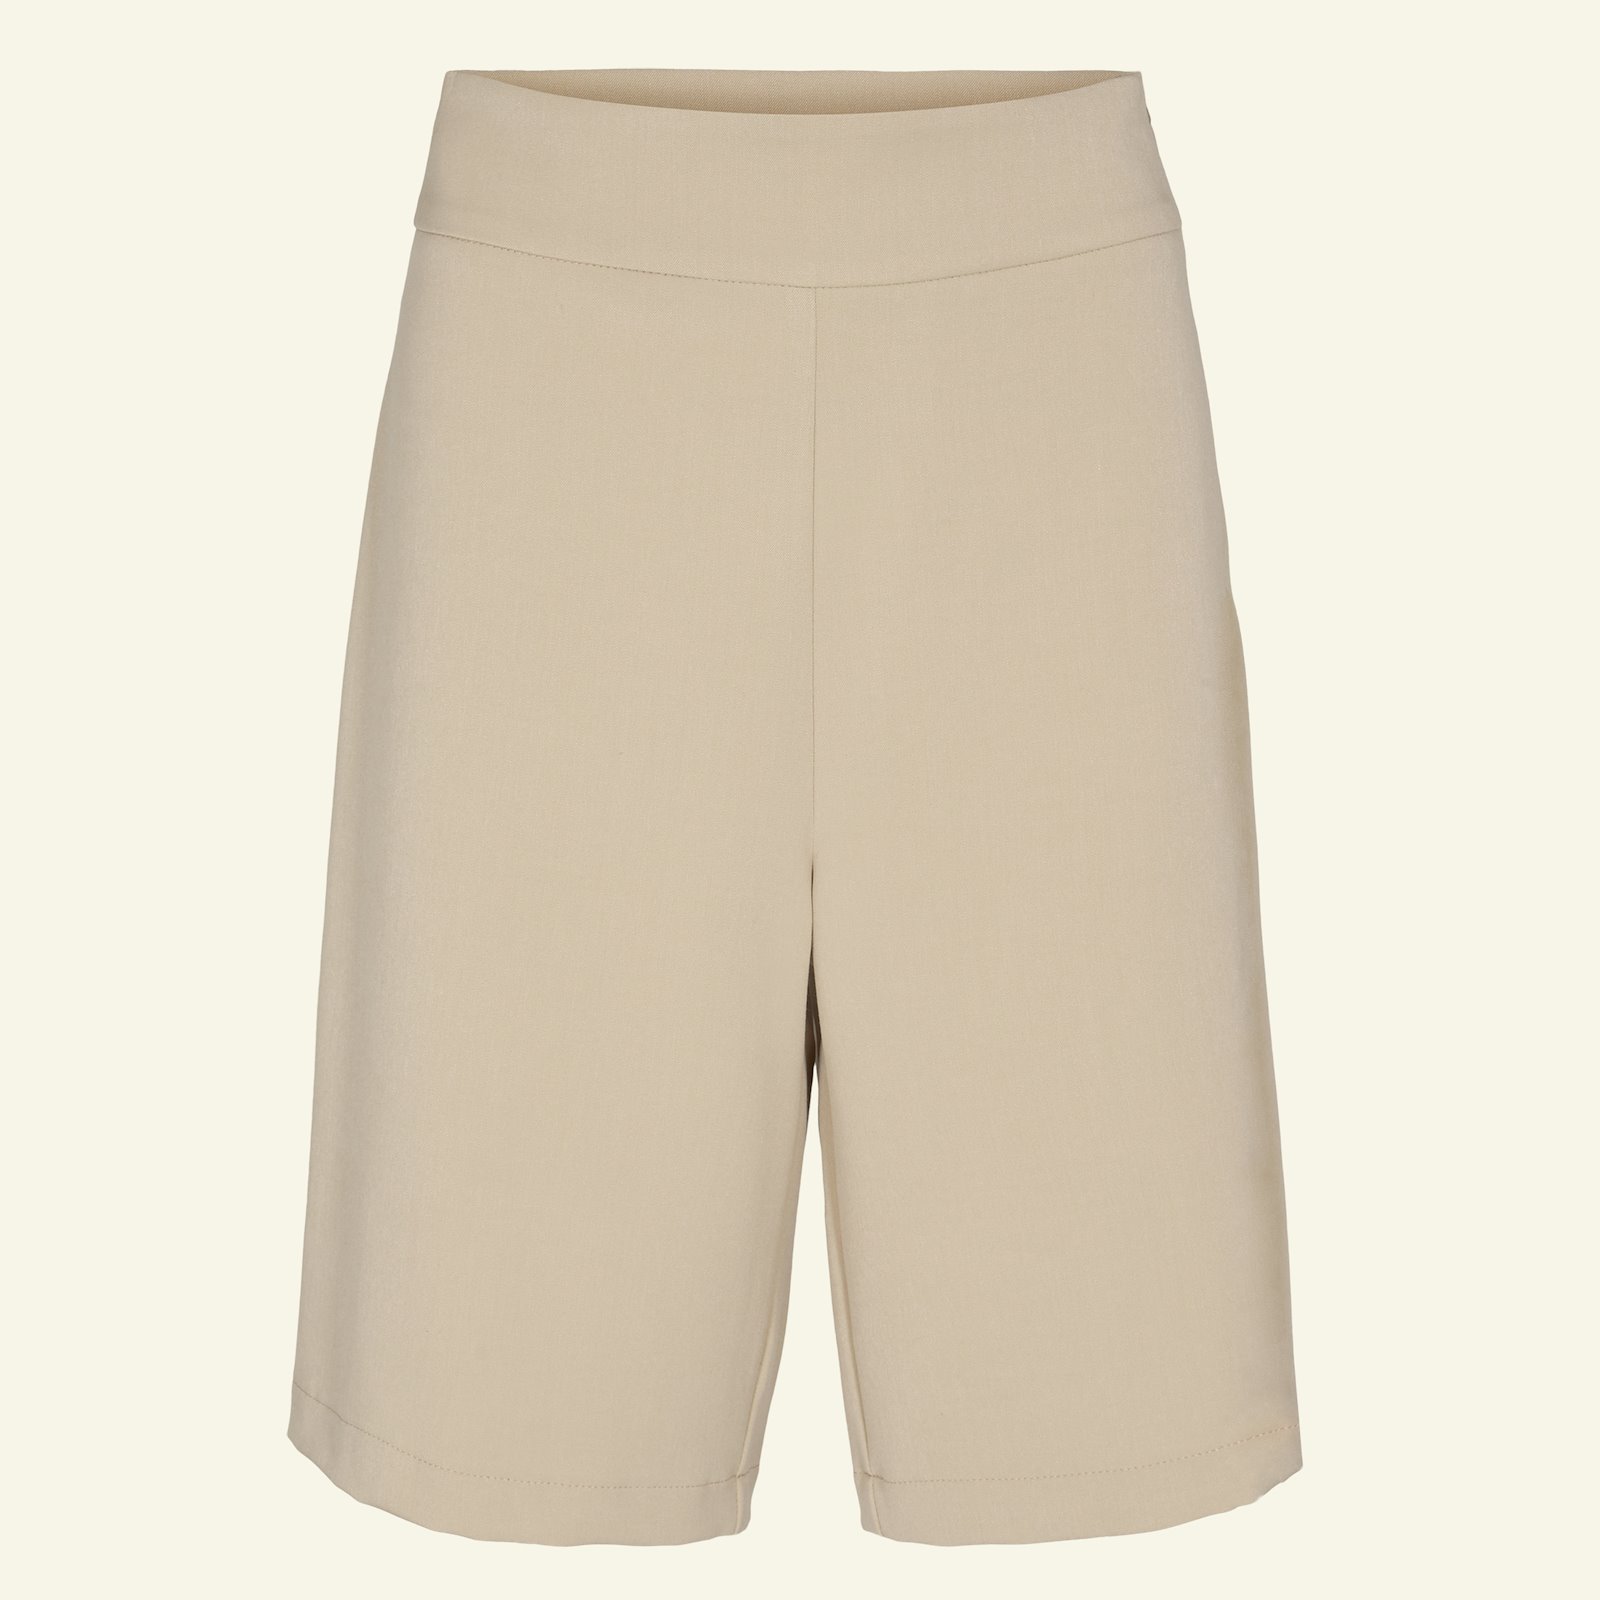 Highwaist and wide legs trousers, 36/8 p20052_460857_sskit